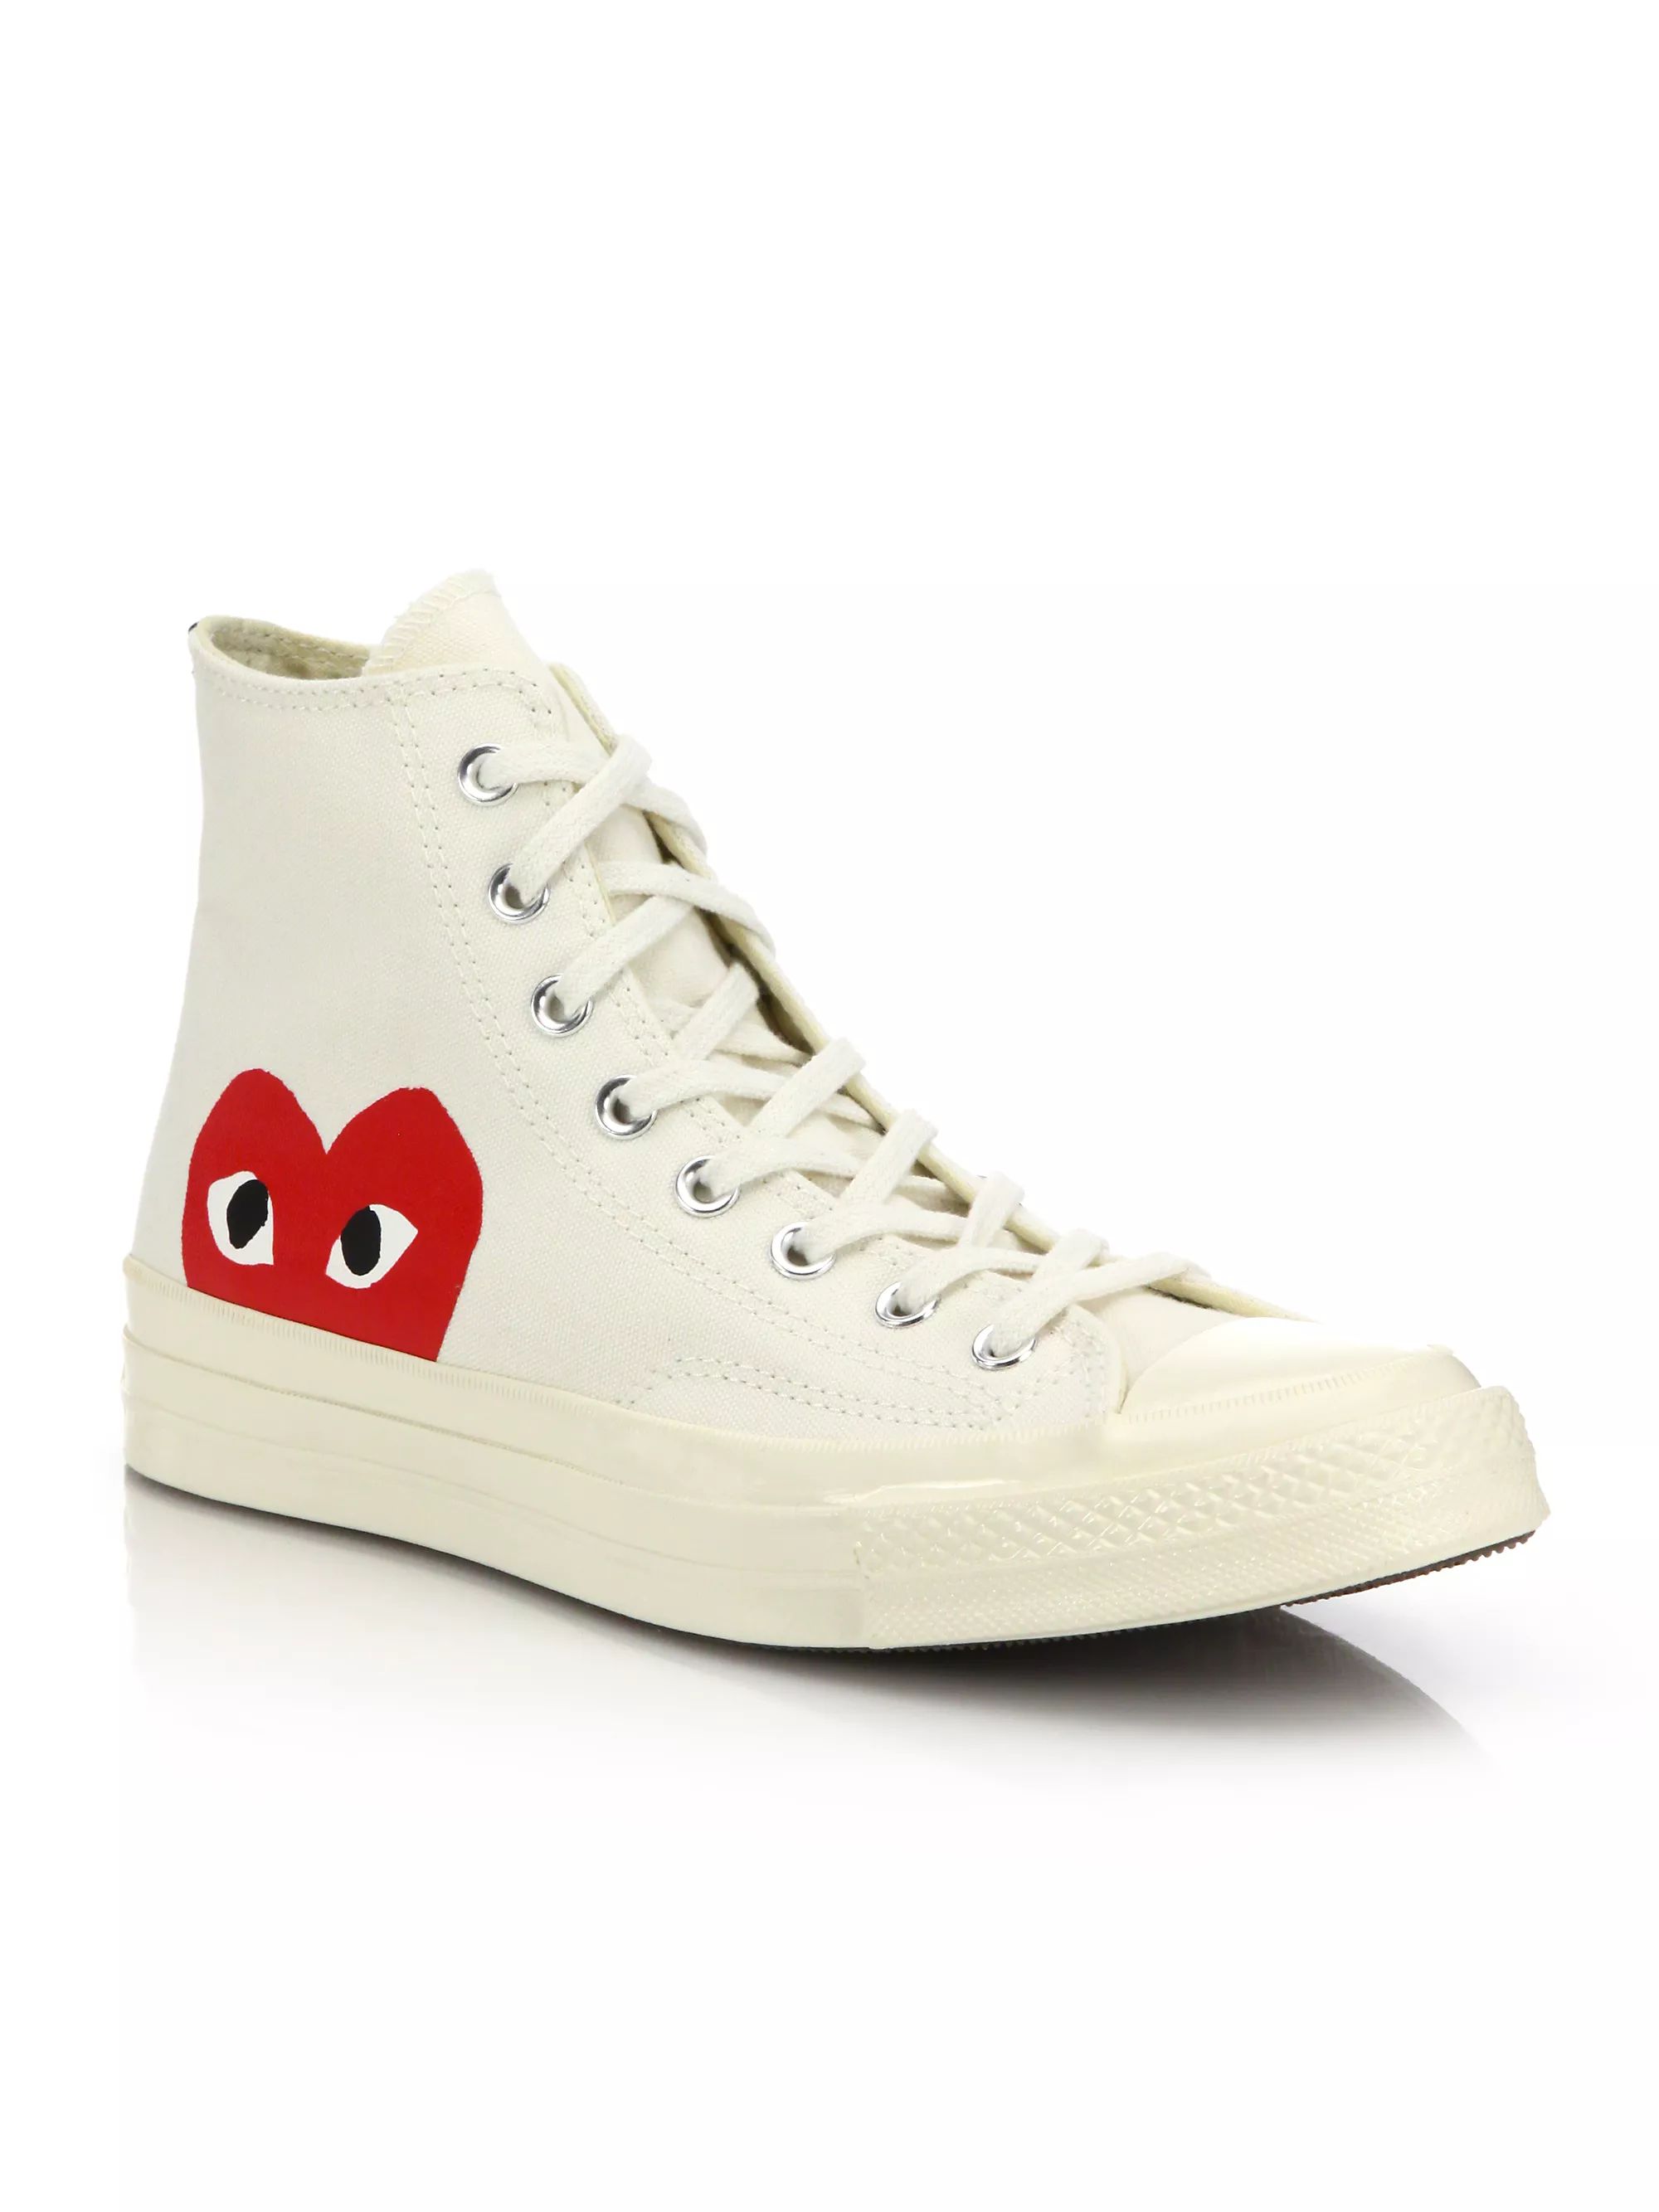 CdG PLAY x Converse Men's Chuck Taylor All Star High-Top Sneakers | Saks Fifth Avenue